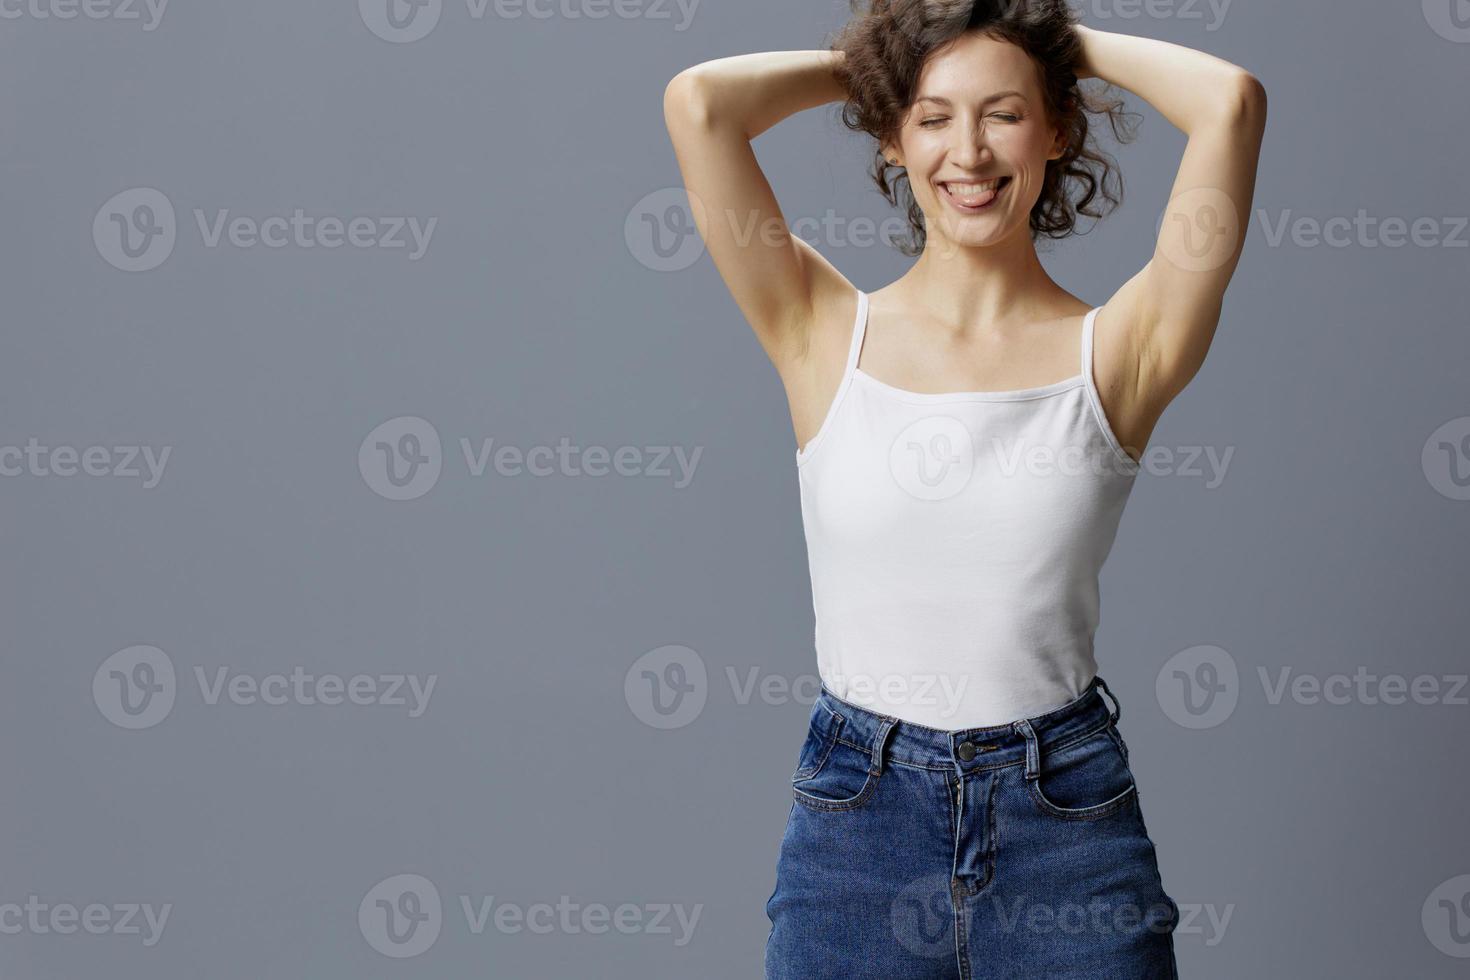 Funny curly beautiful woman in basic white t-shirt raise hair sticks tongue out posing isolated on over gray blue background. People Lifestyle Emotions concept. Copy space Free place offer photo